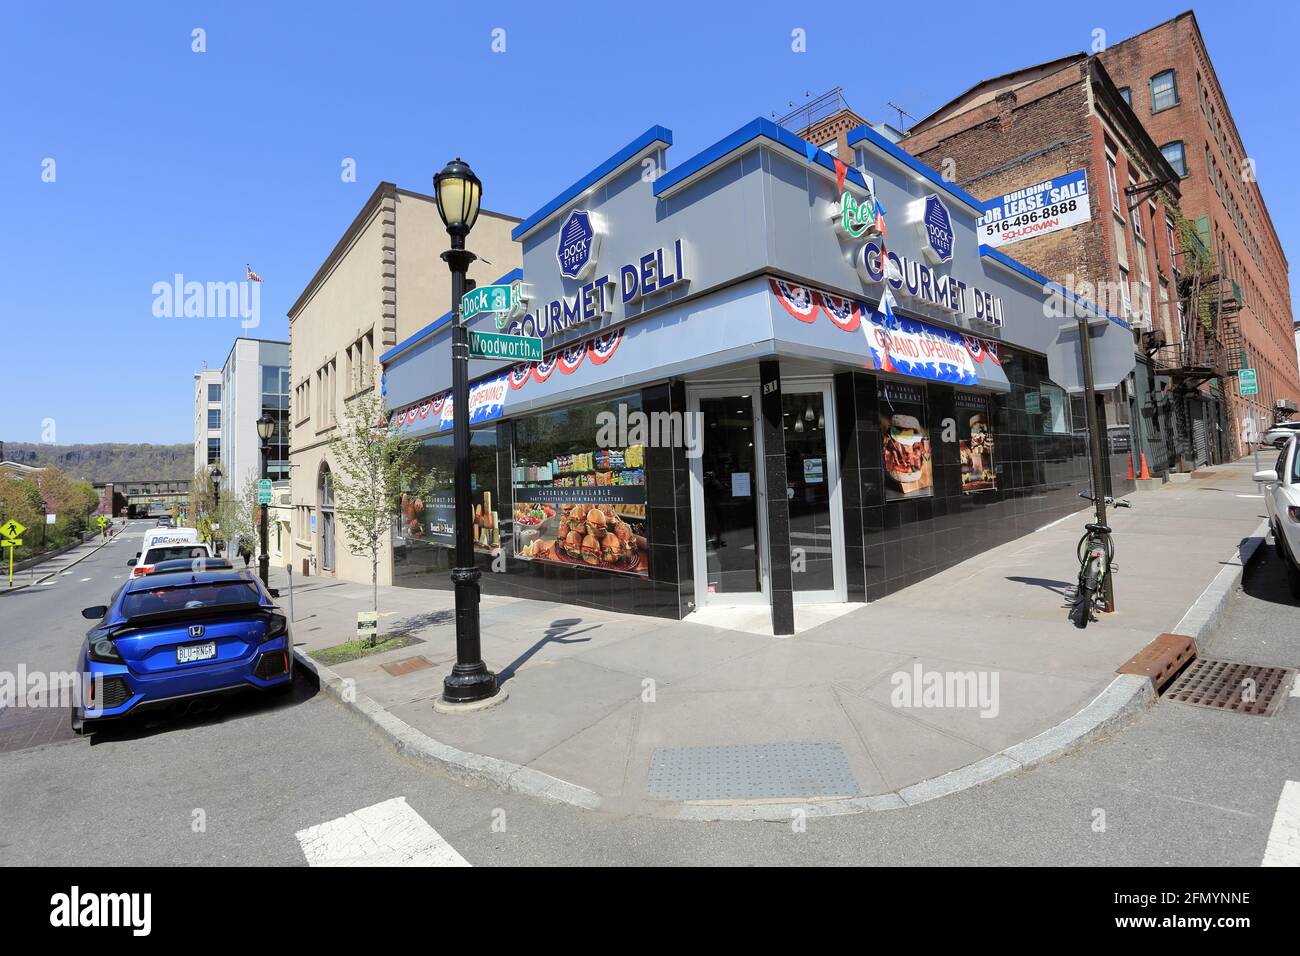 New deli downtown Yonkers New York Stock Photo